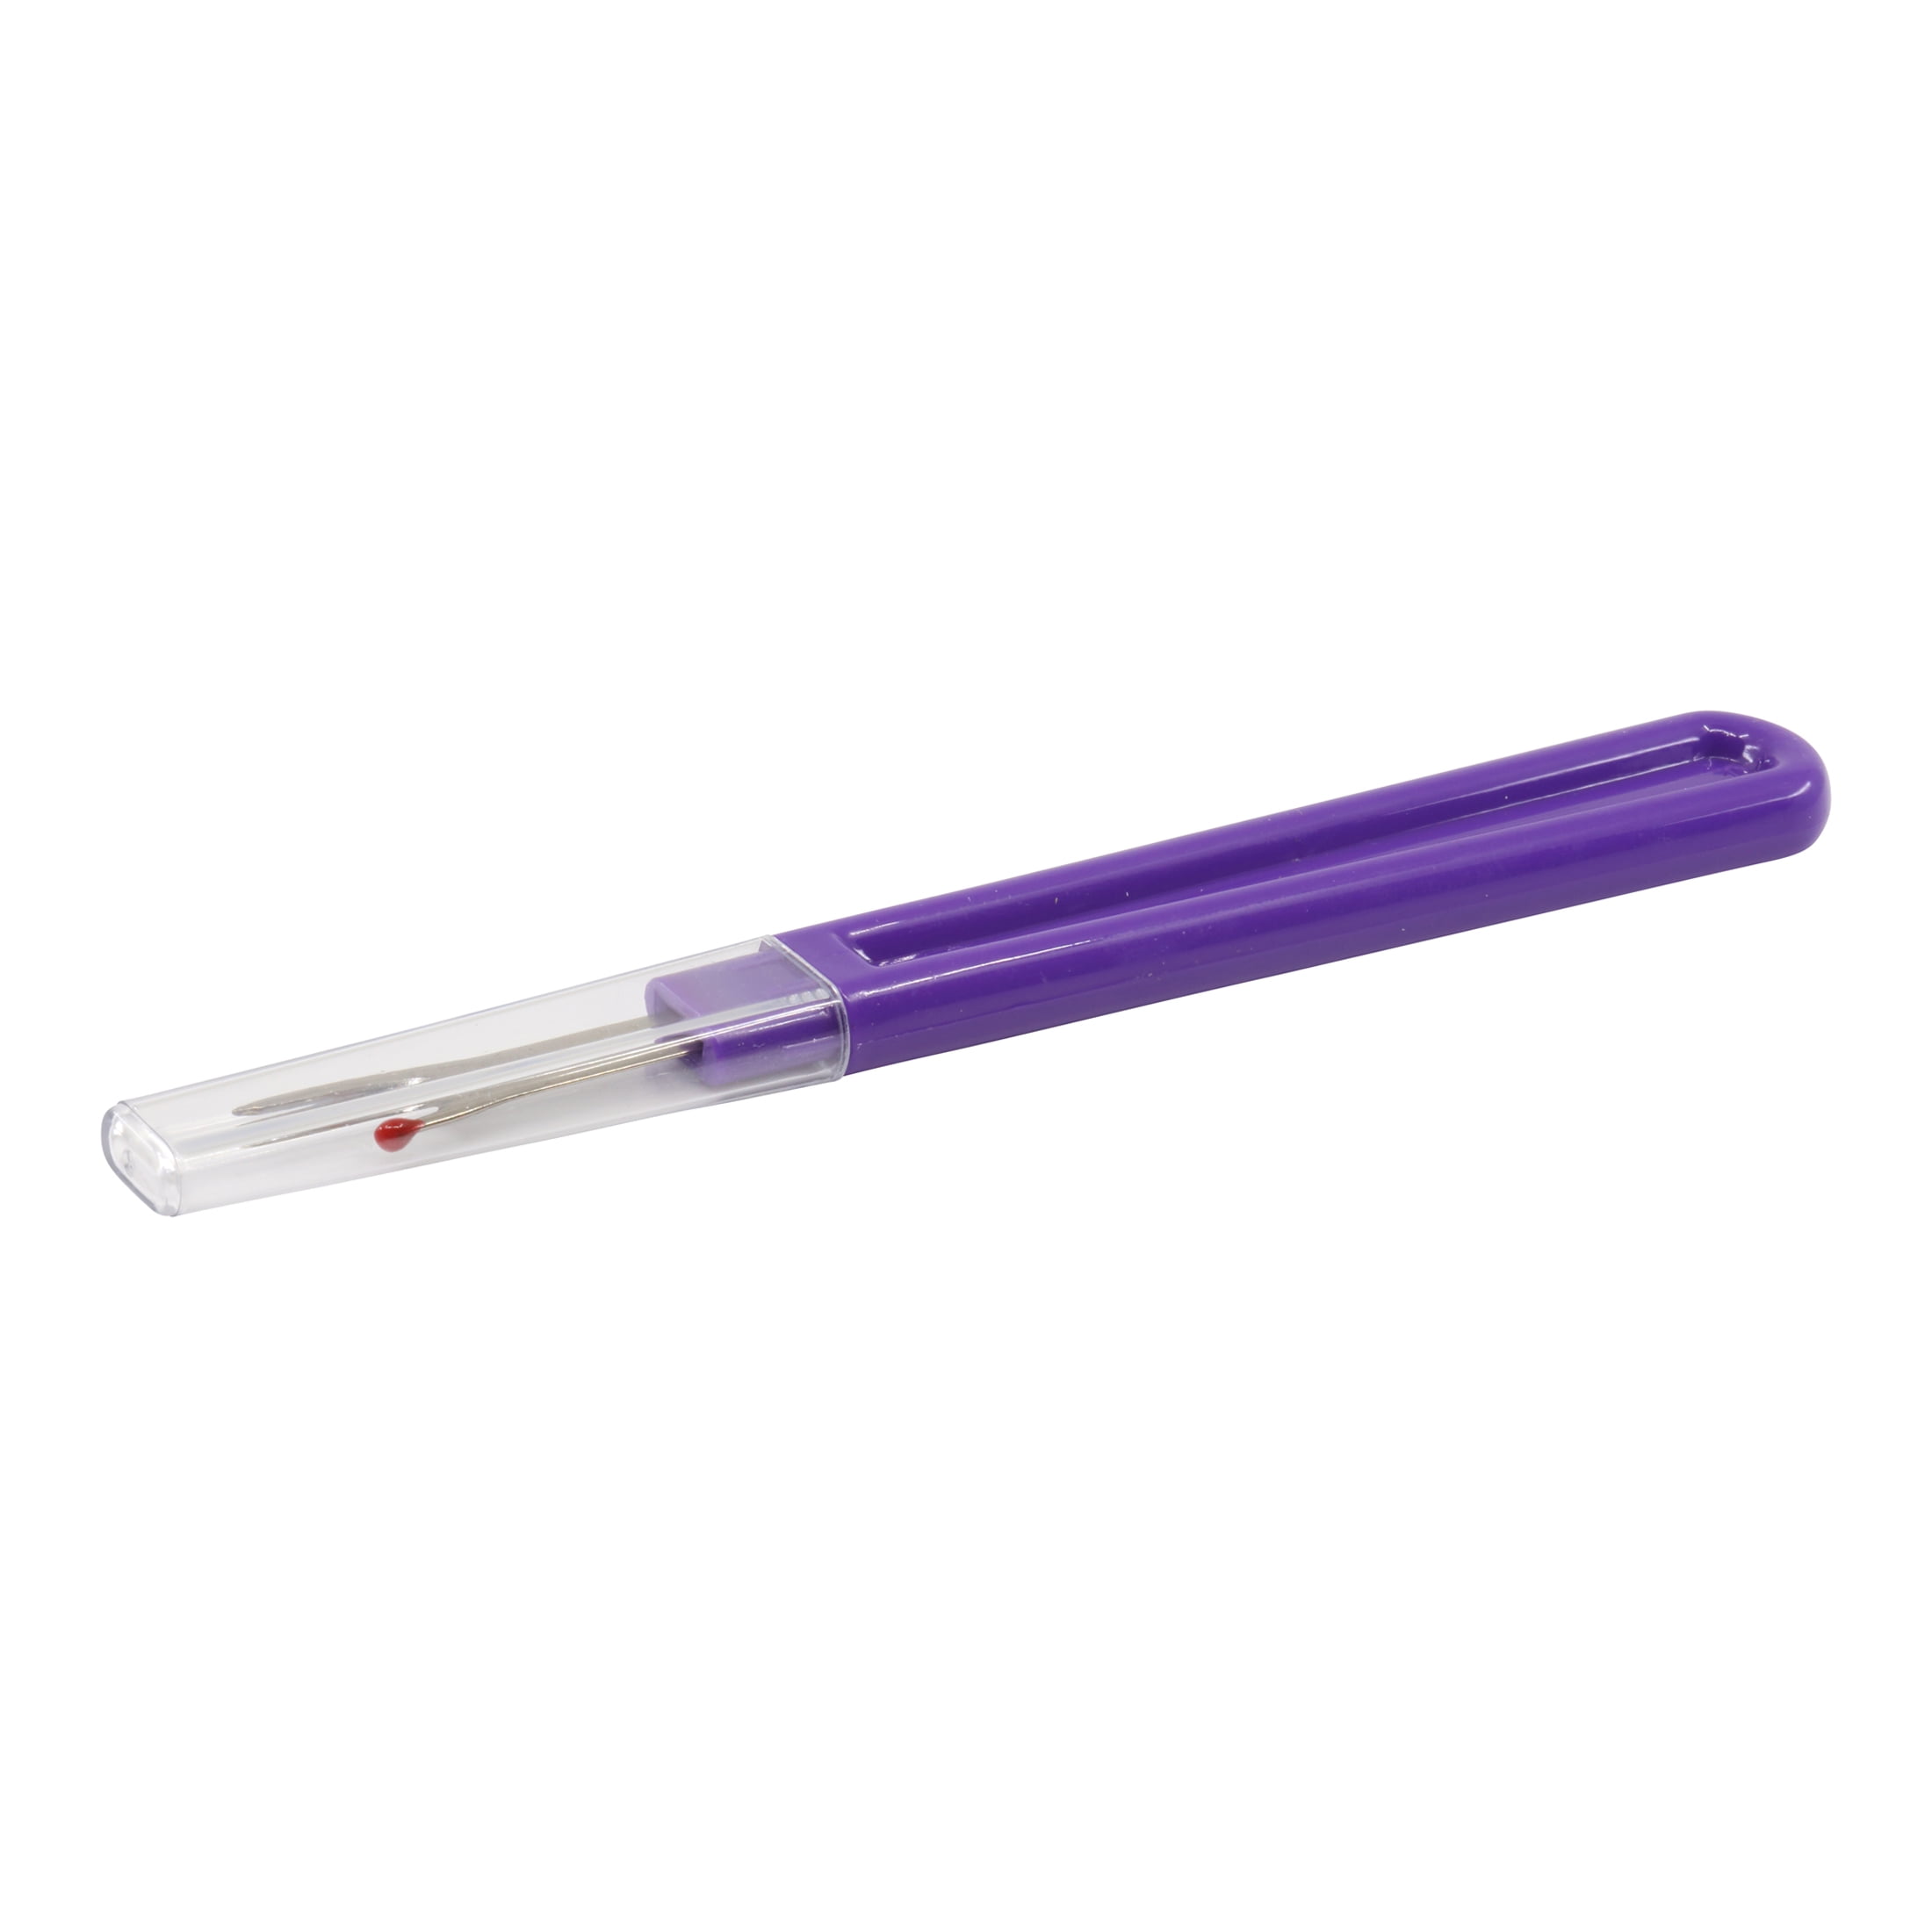 Buy the best gifts Dritz Seam Fix Seam Ripper, Pink for Dad Mom